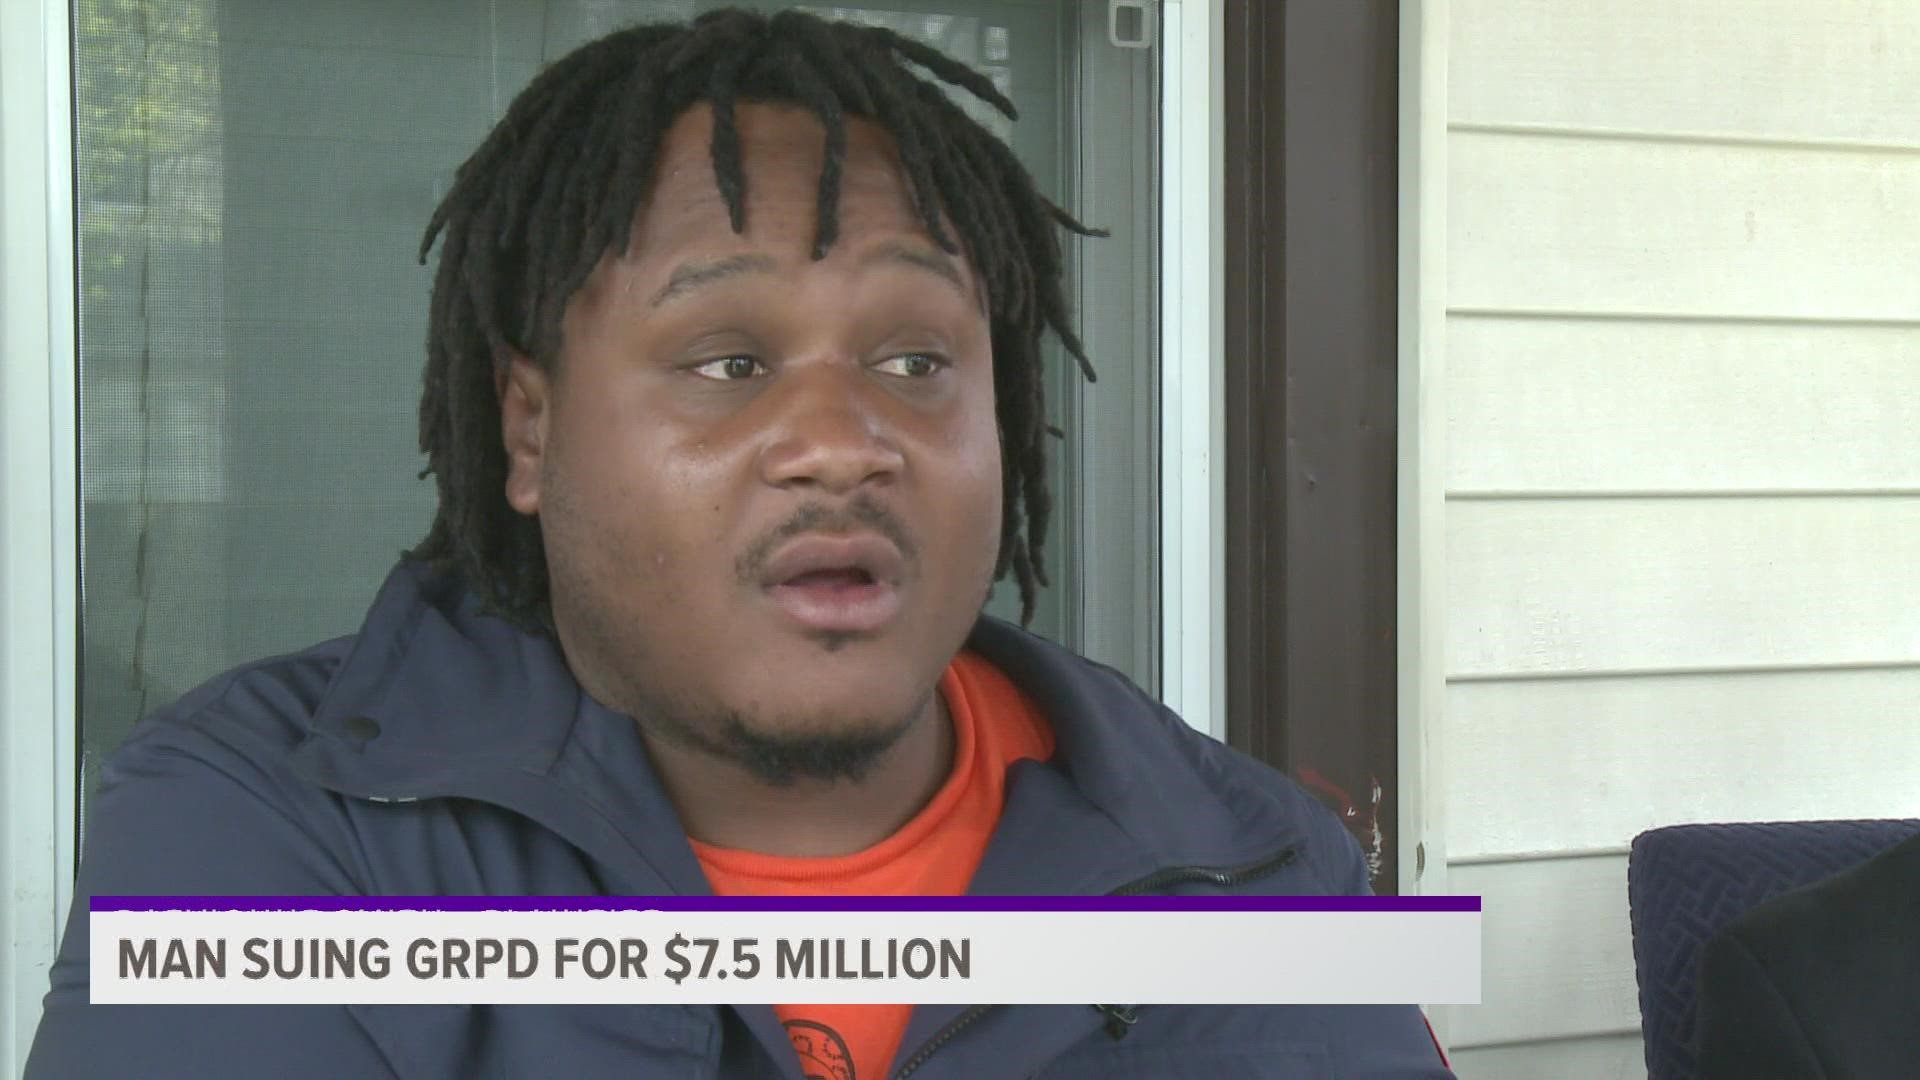 A Grand Rapids man is filing a lawsuit against the Grand Rapids Police Department, one of their officers and the city for $7.5 million.